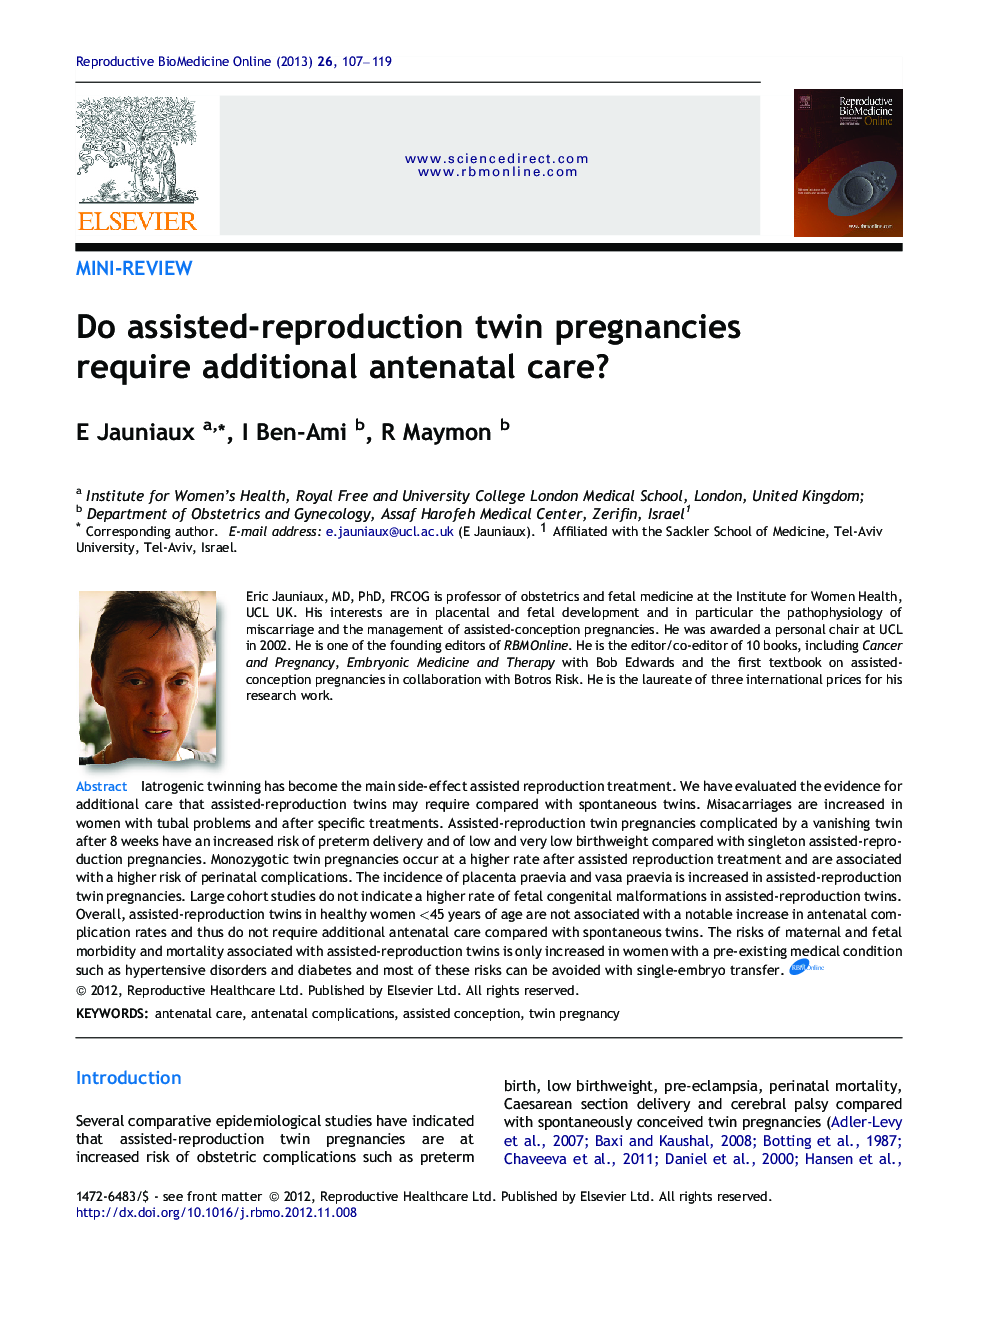 Do assisted-reproduction twin pregnancies require additional antenatal care? 